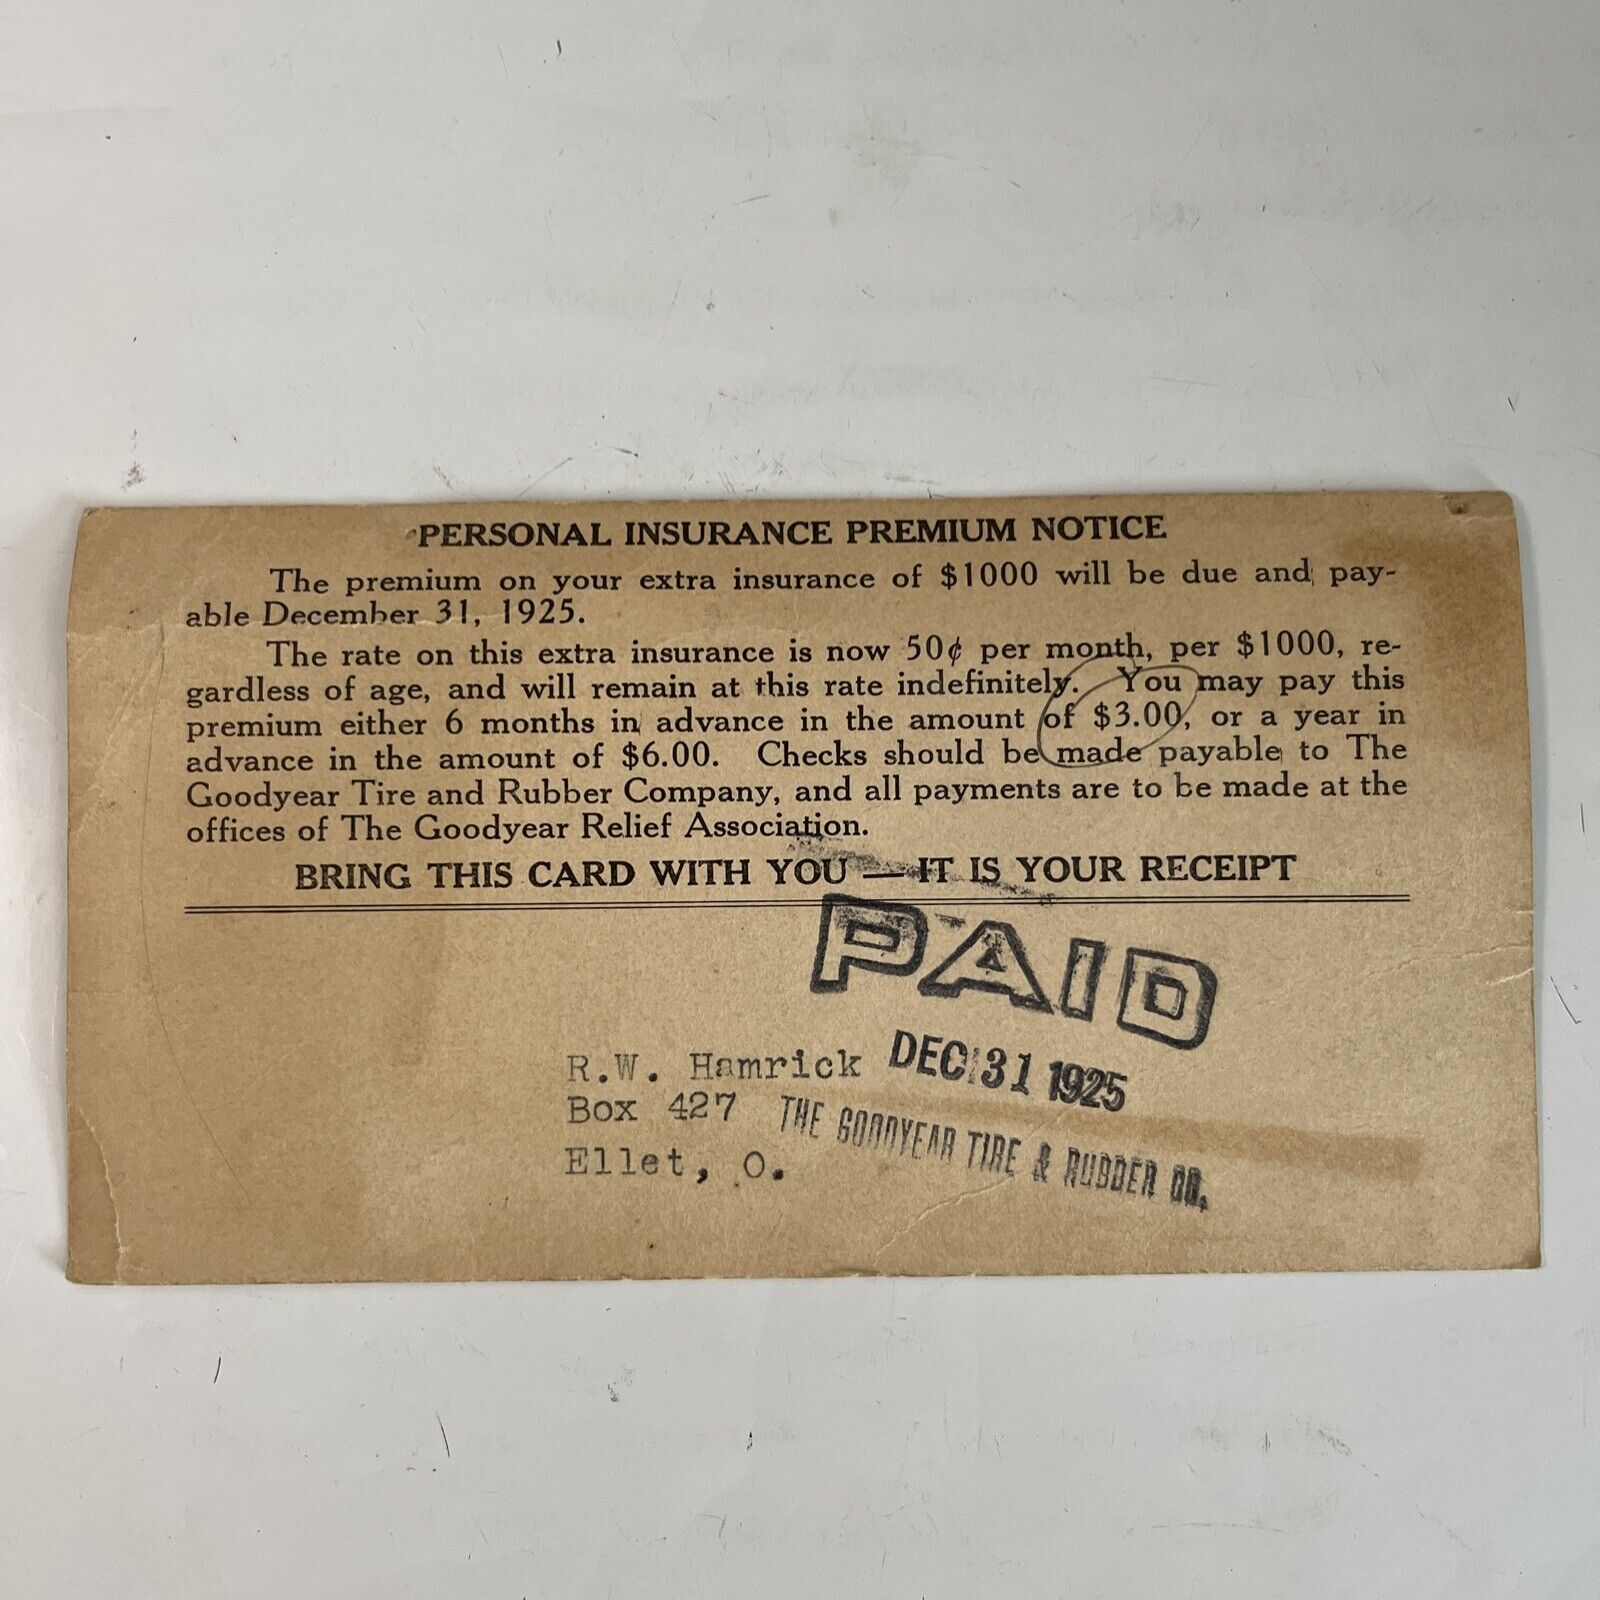 1925 The Goodyear Tire & Rubber Co. Employee Personal Insurance Premium Notice